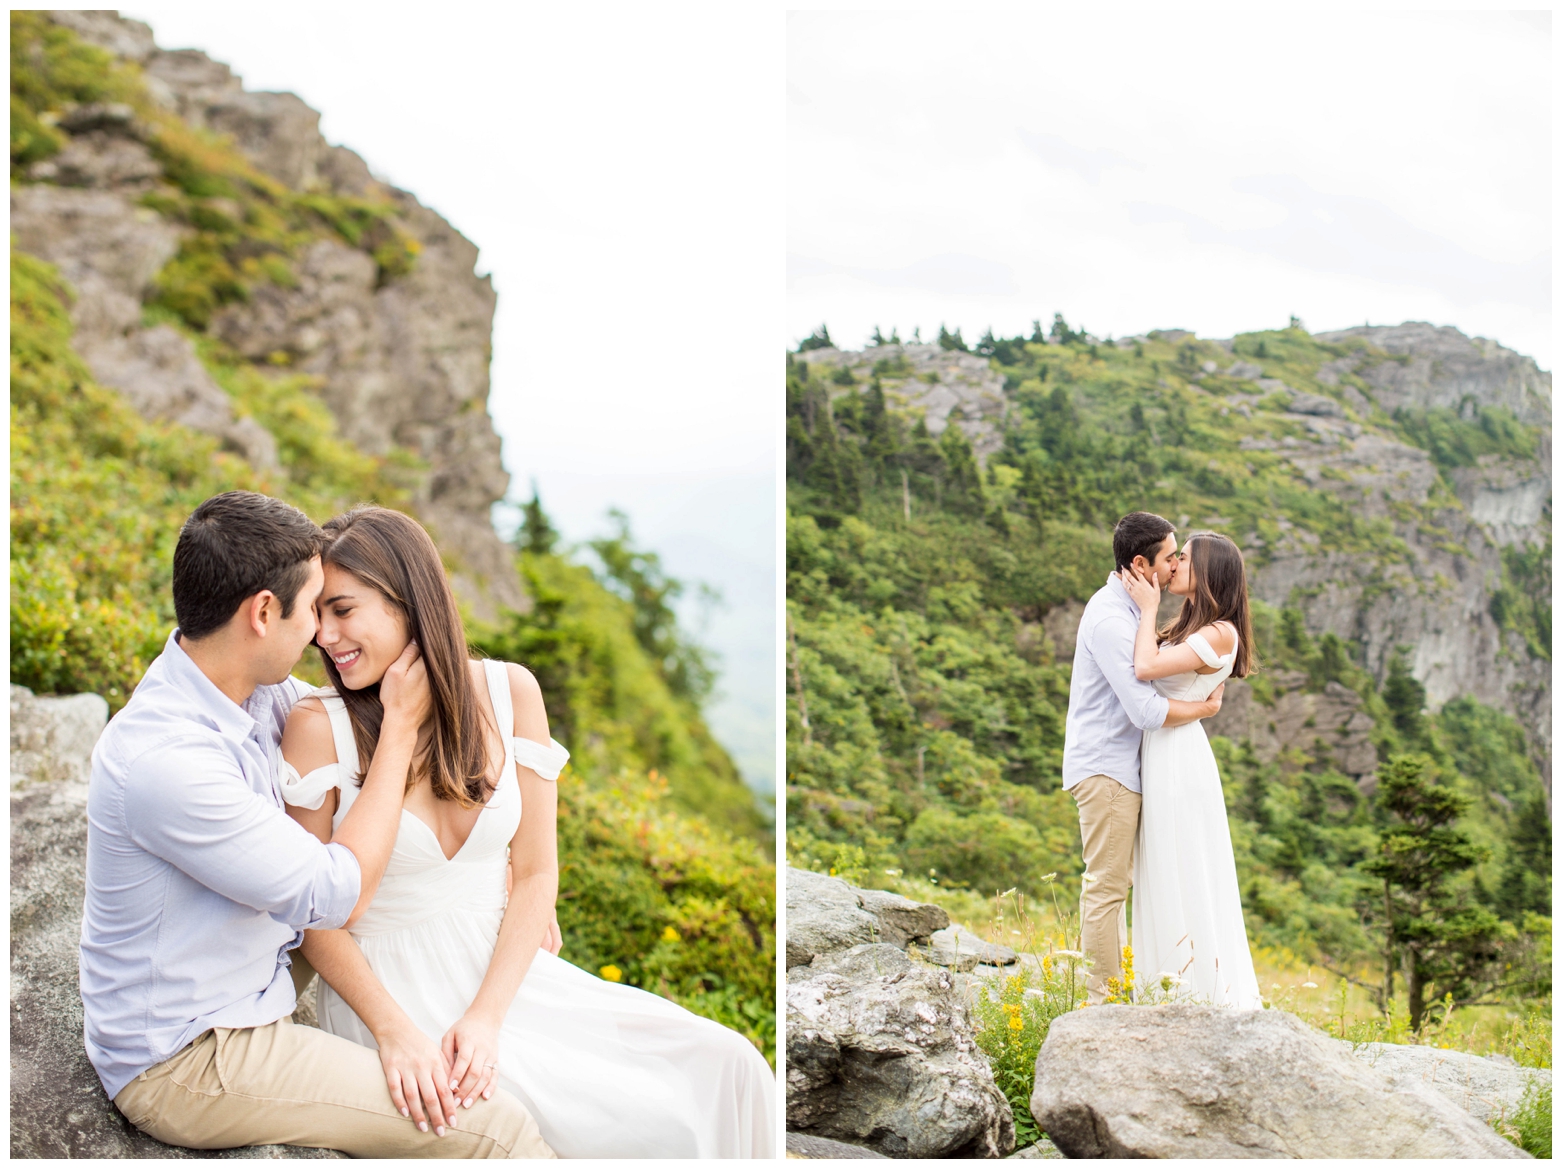 View More: http://hopetaylorphotographyphotos.pass.us/kristen-and-anthony-engagement